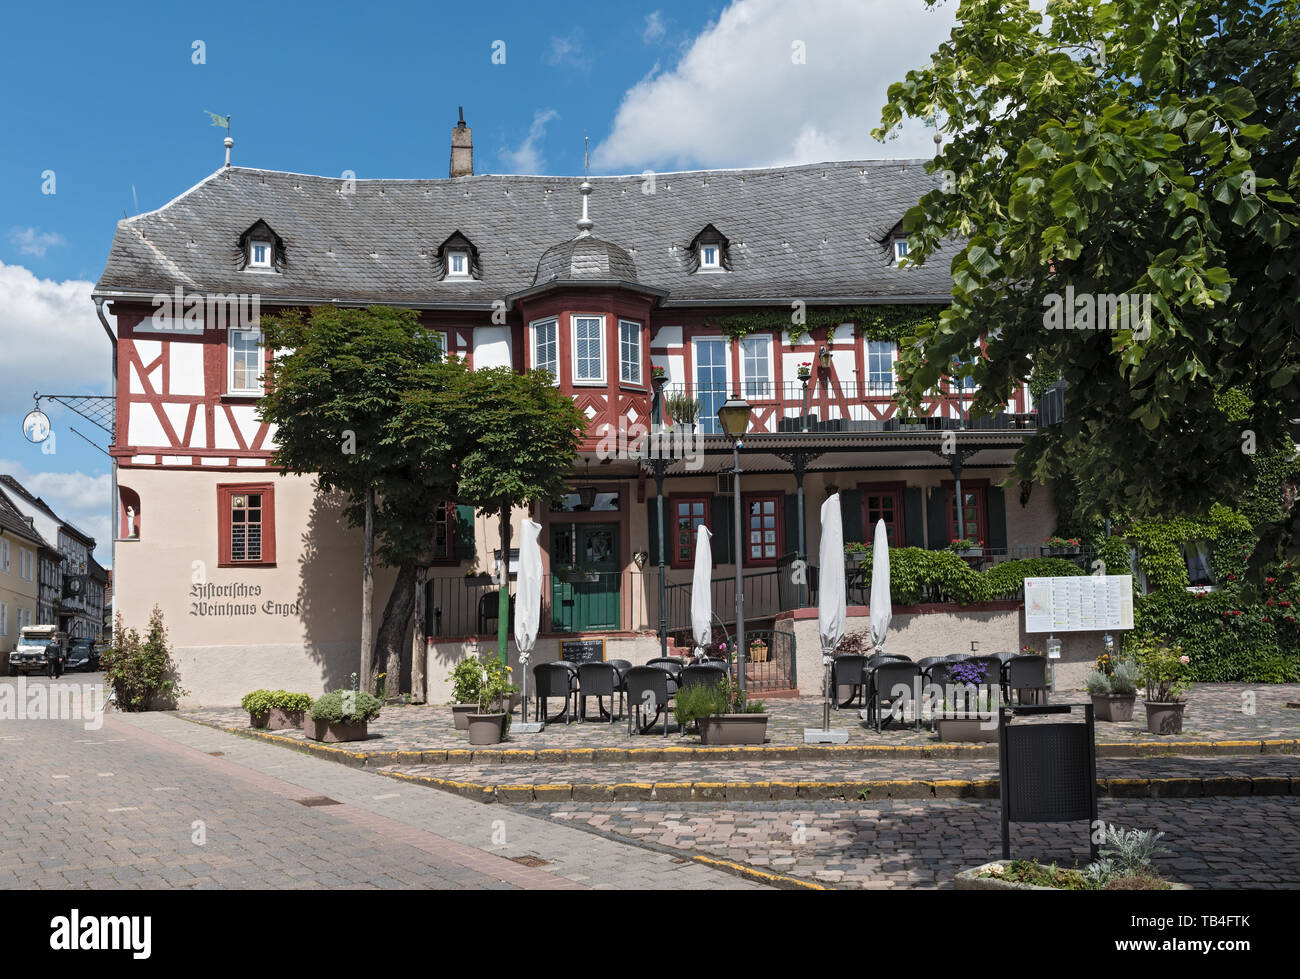 half timbered house on market square in kiedrich germany Stock Photo